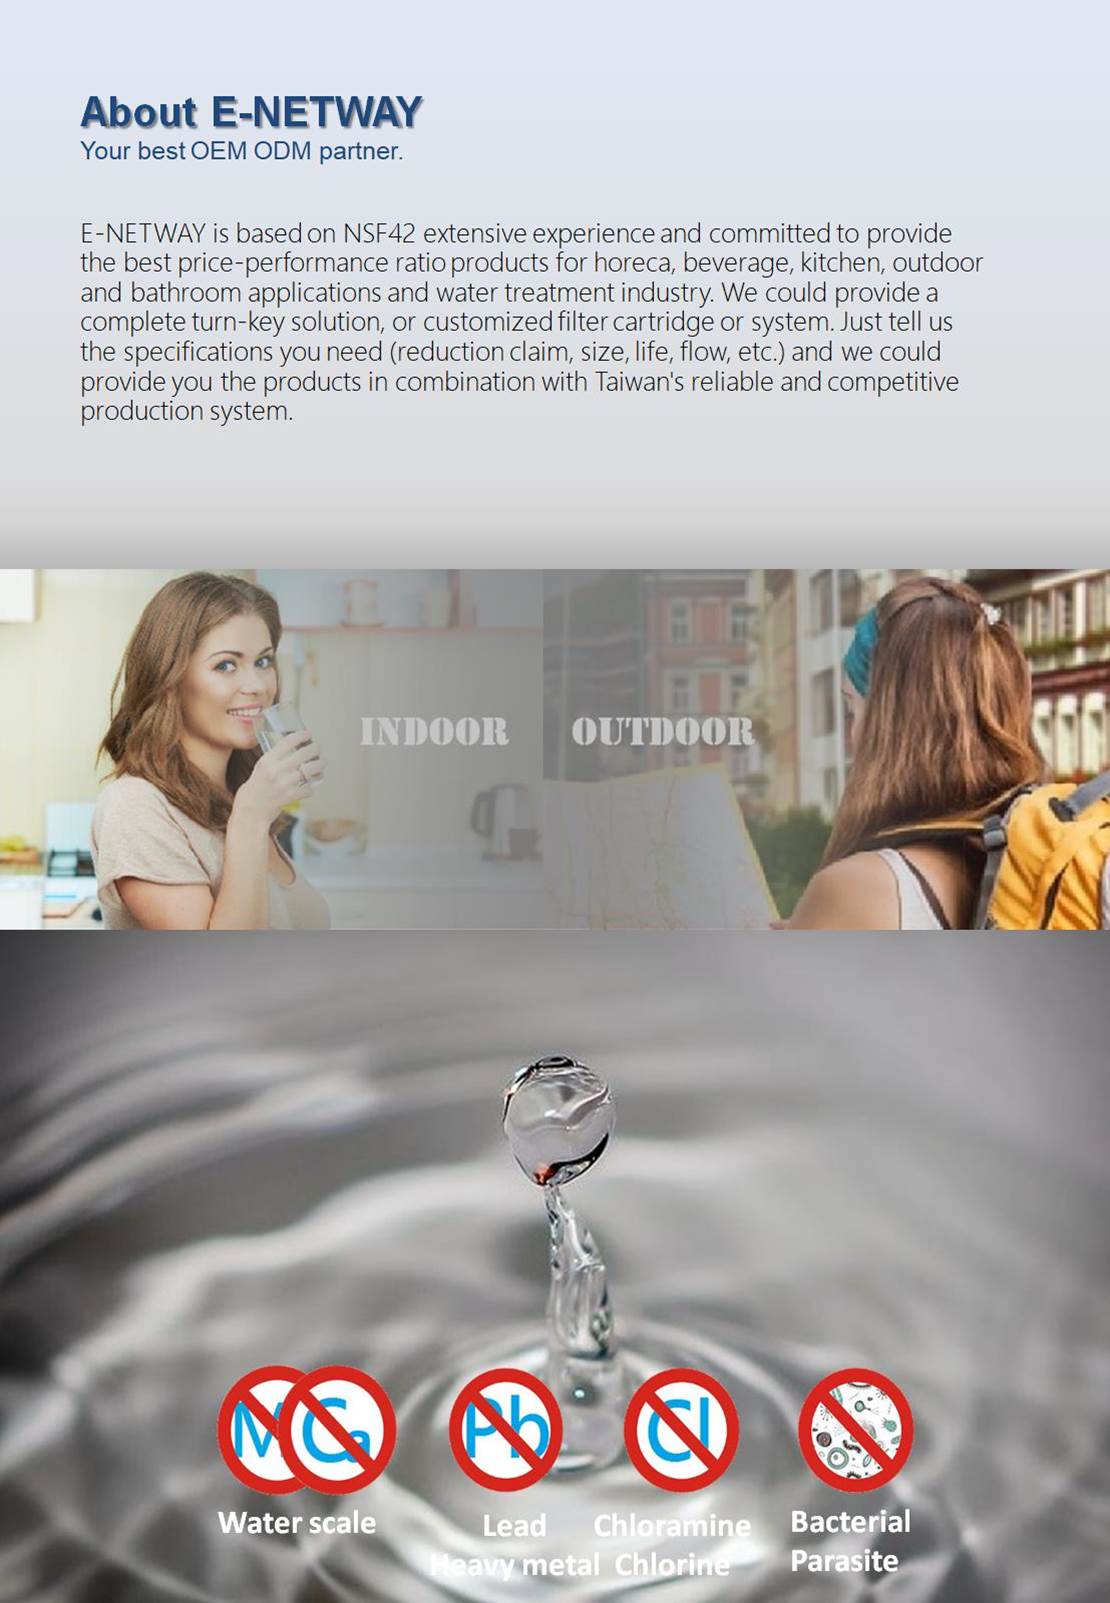 E-NETWAY is your water filter manufacturer partner in Taiwan.